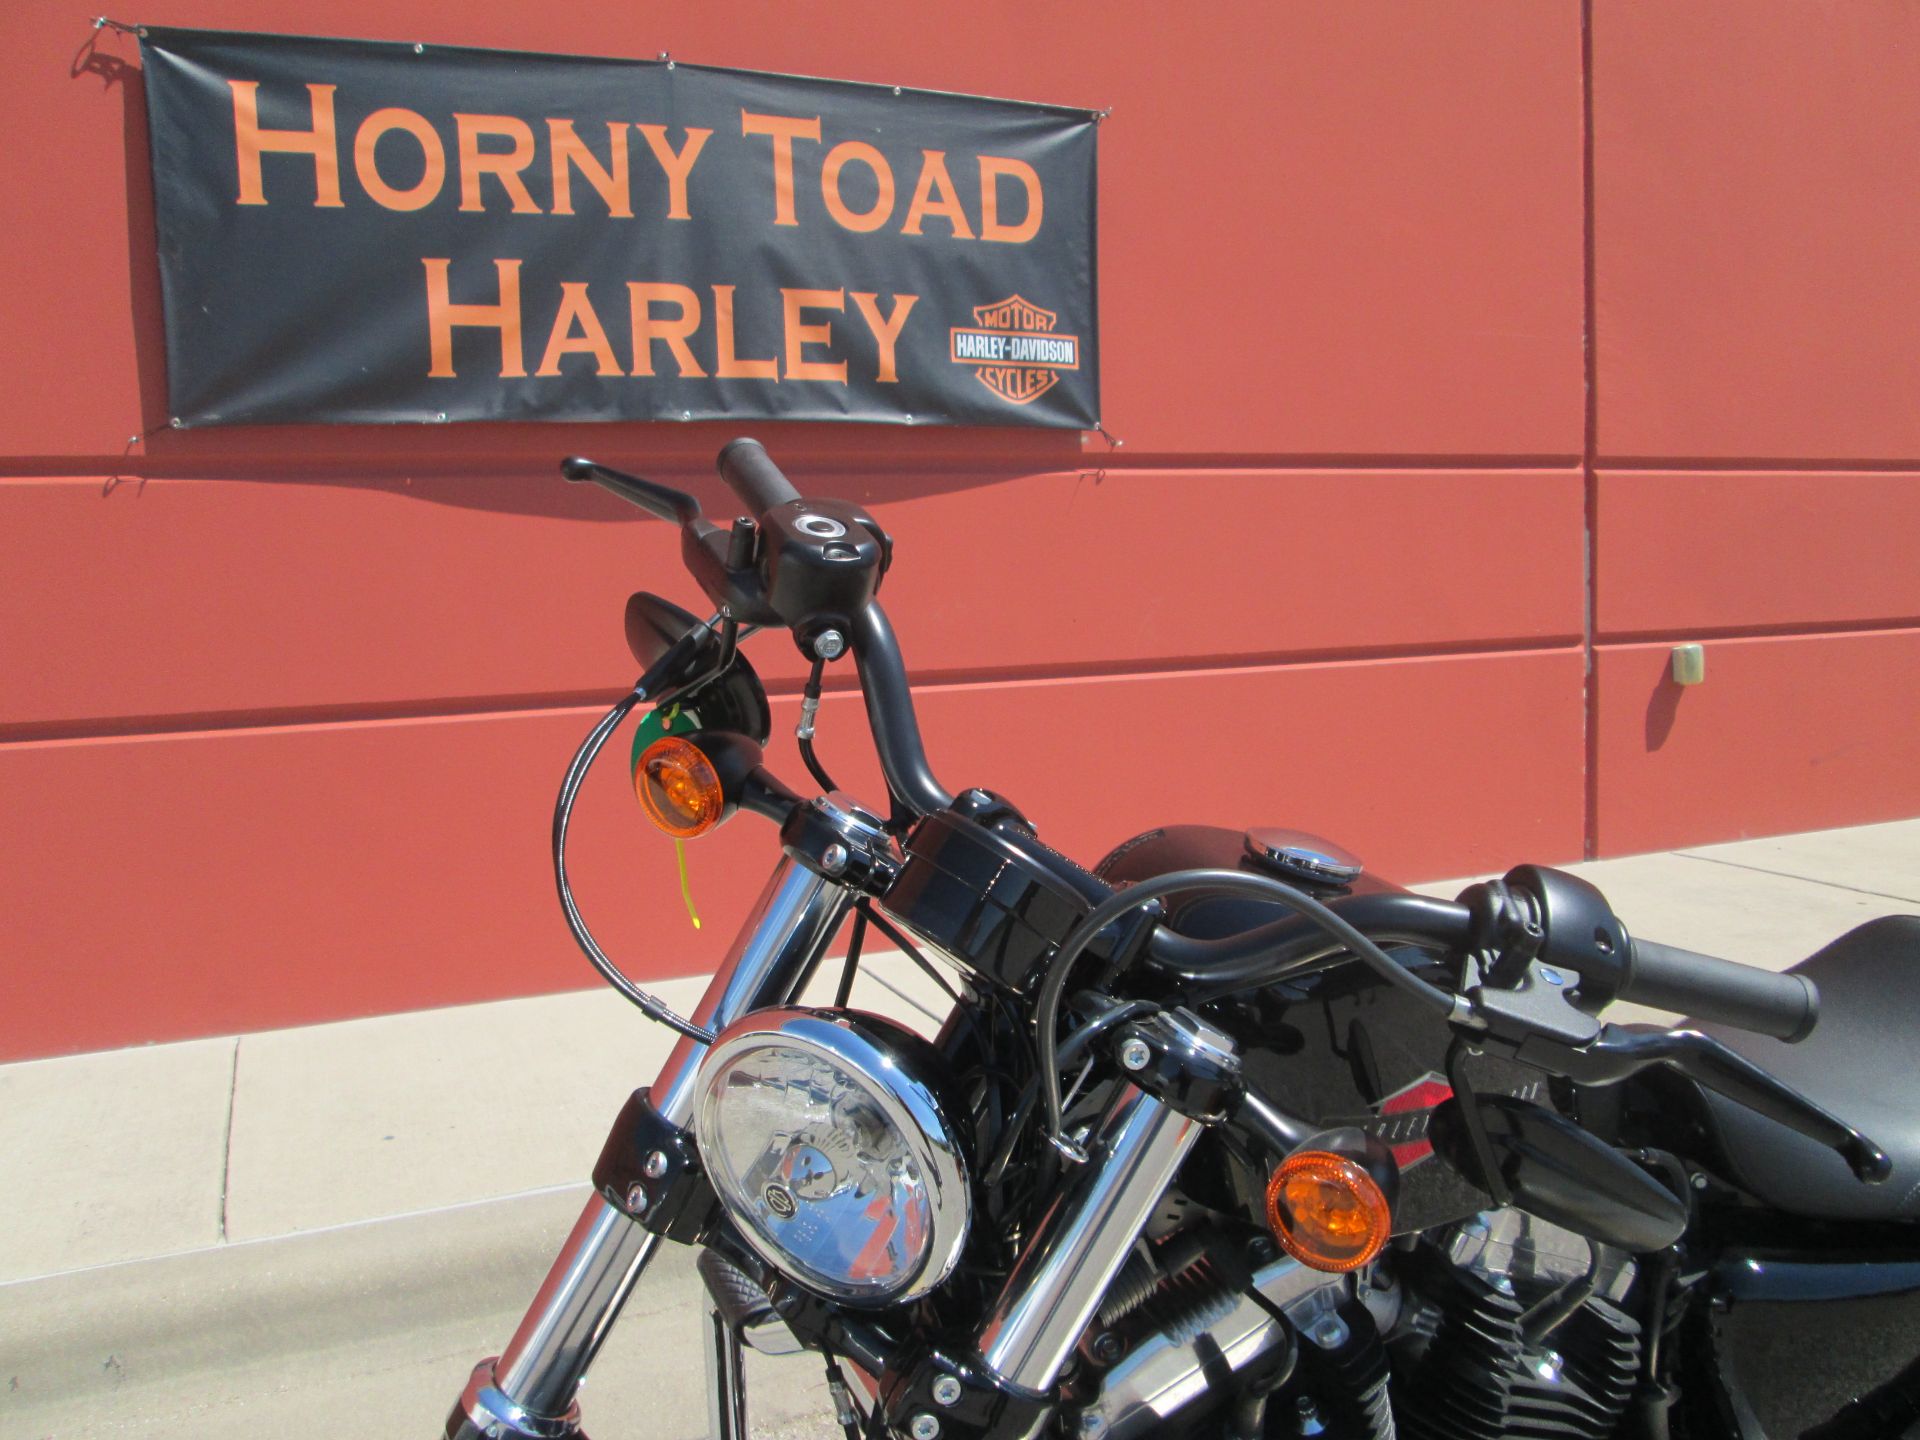 2020 Harley-Davidson Forty-Eight® in Temple, Texas - Photo 3